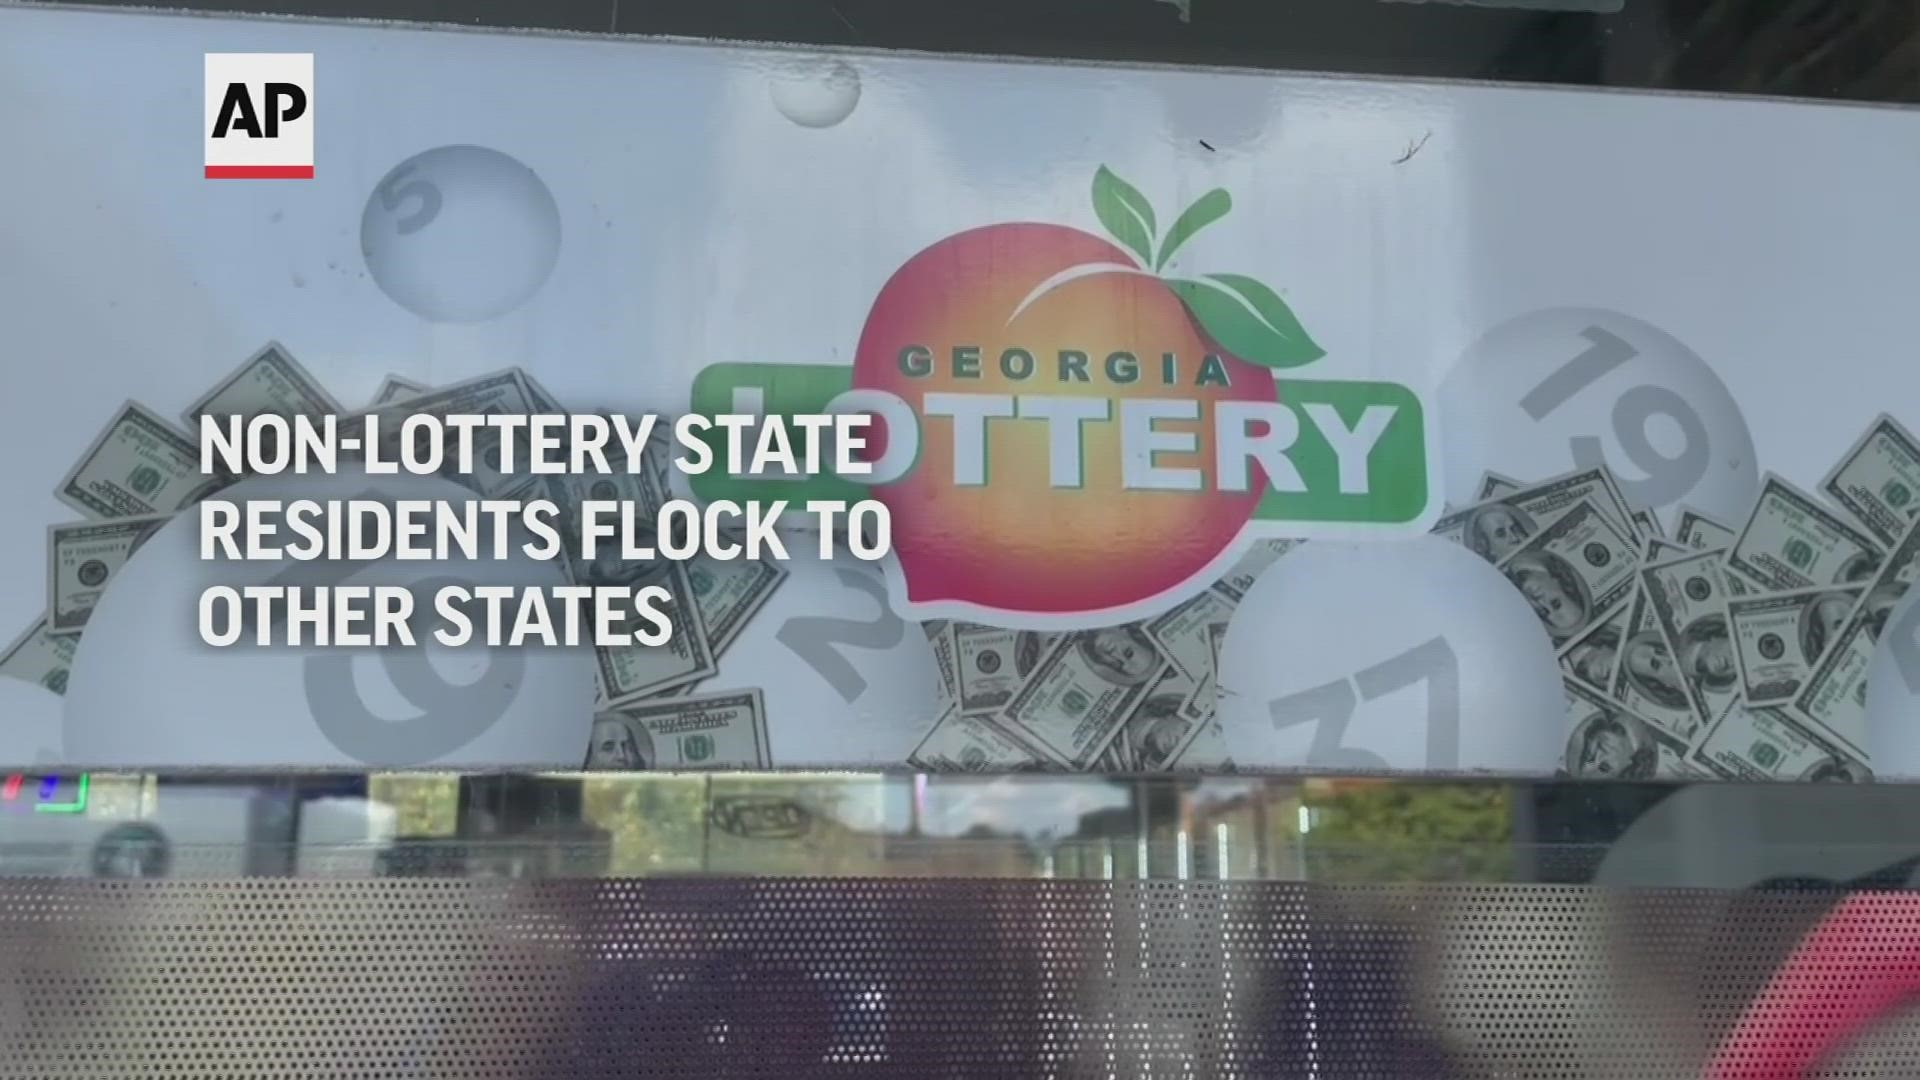 A mixture of reasons have kept the lottery away from 5 states, including objections from conservatives concerns and a desire not to compete with existing casinos.